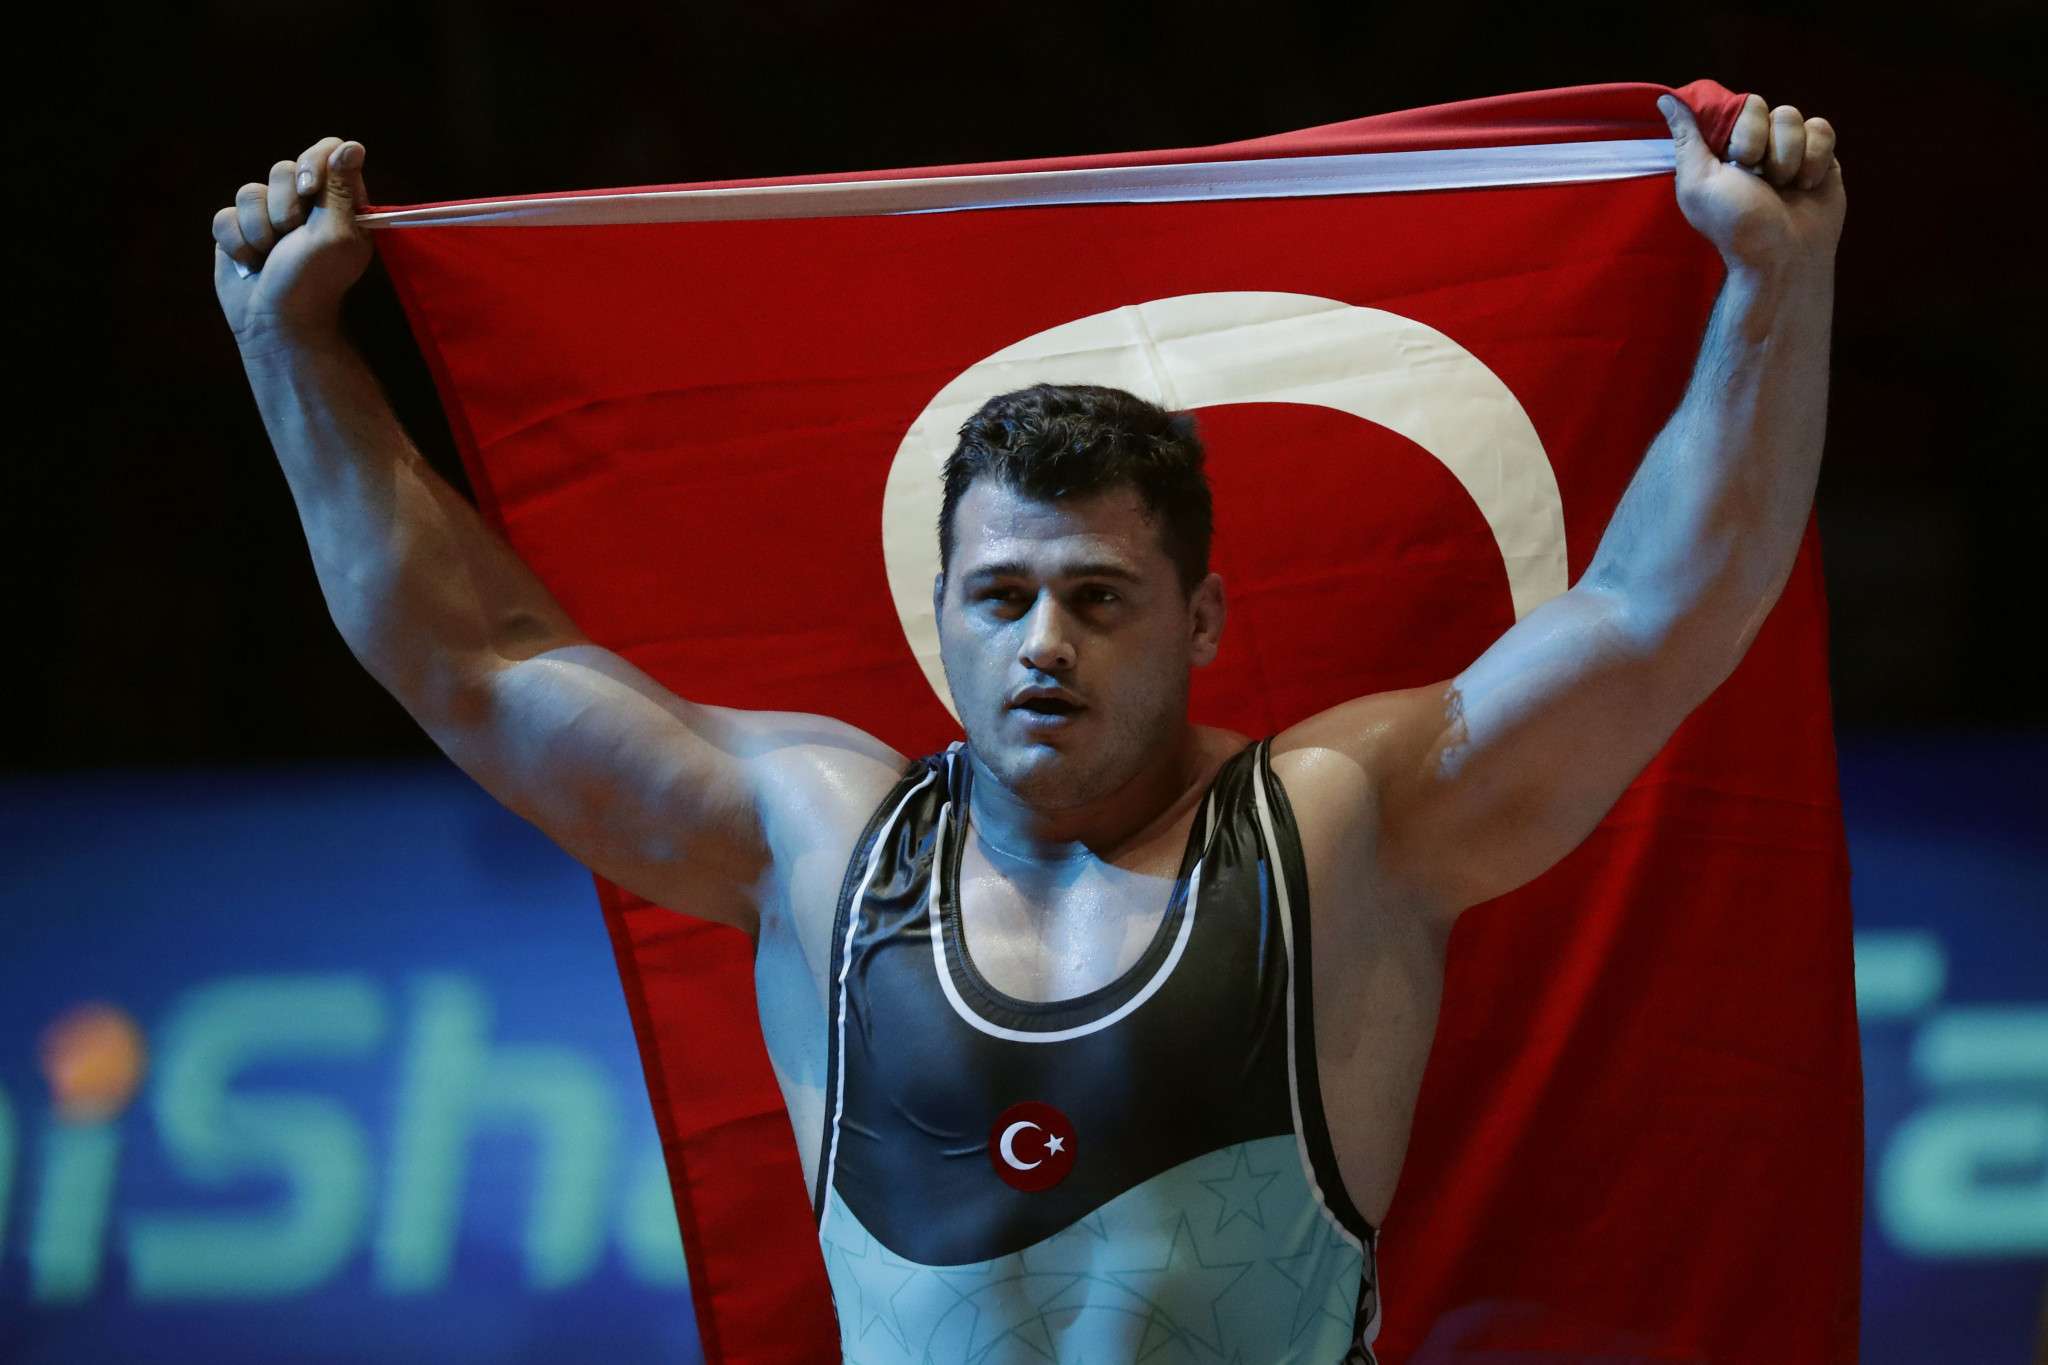 Turkey's triple world champion rises to number one spot as Greco-Roman rankings published